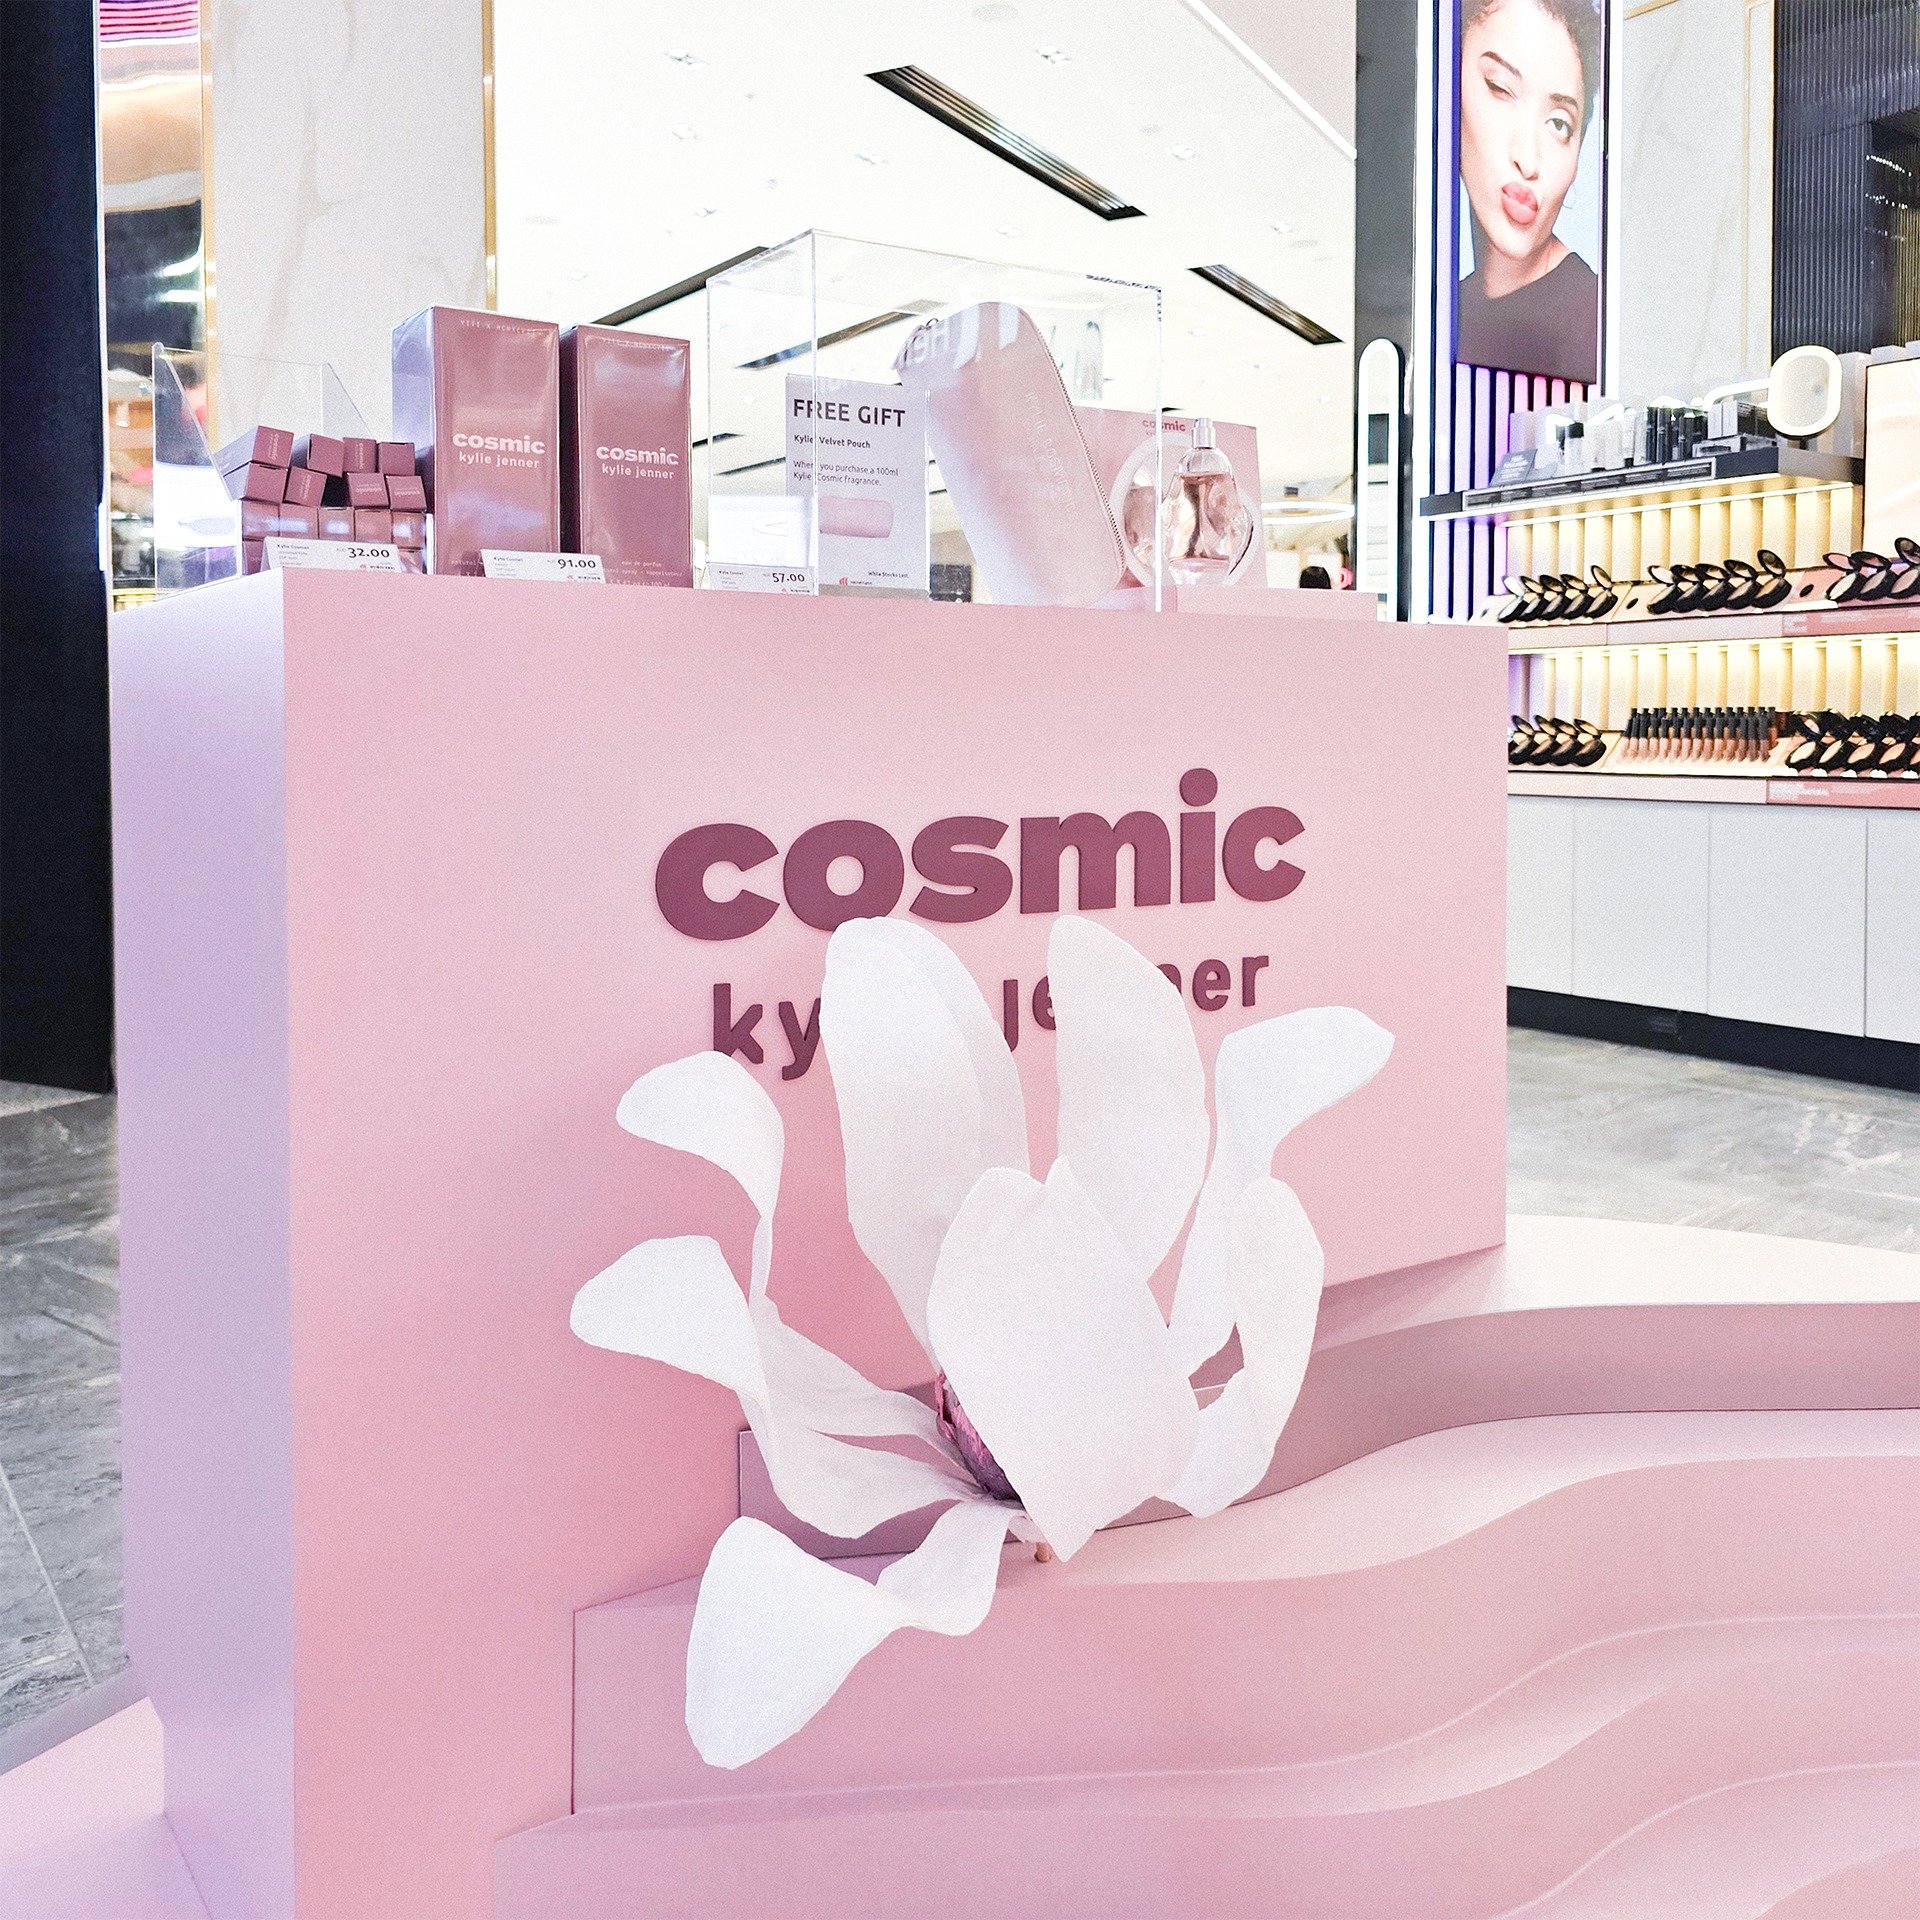 &ldquo;A sculptural bottle formed to fit perfectly in the palm of your hand,&rdquo; we designed this #TravelRetailDisplay for @cotydutyfree_anz to reflect the newest #CosmicKylie #perfume by @kyliecosmetics.

Installation: @artandsoul.com.au
Spatial 